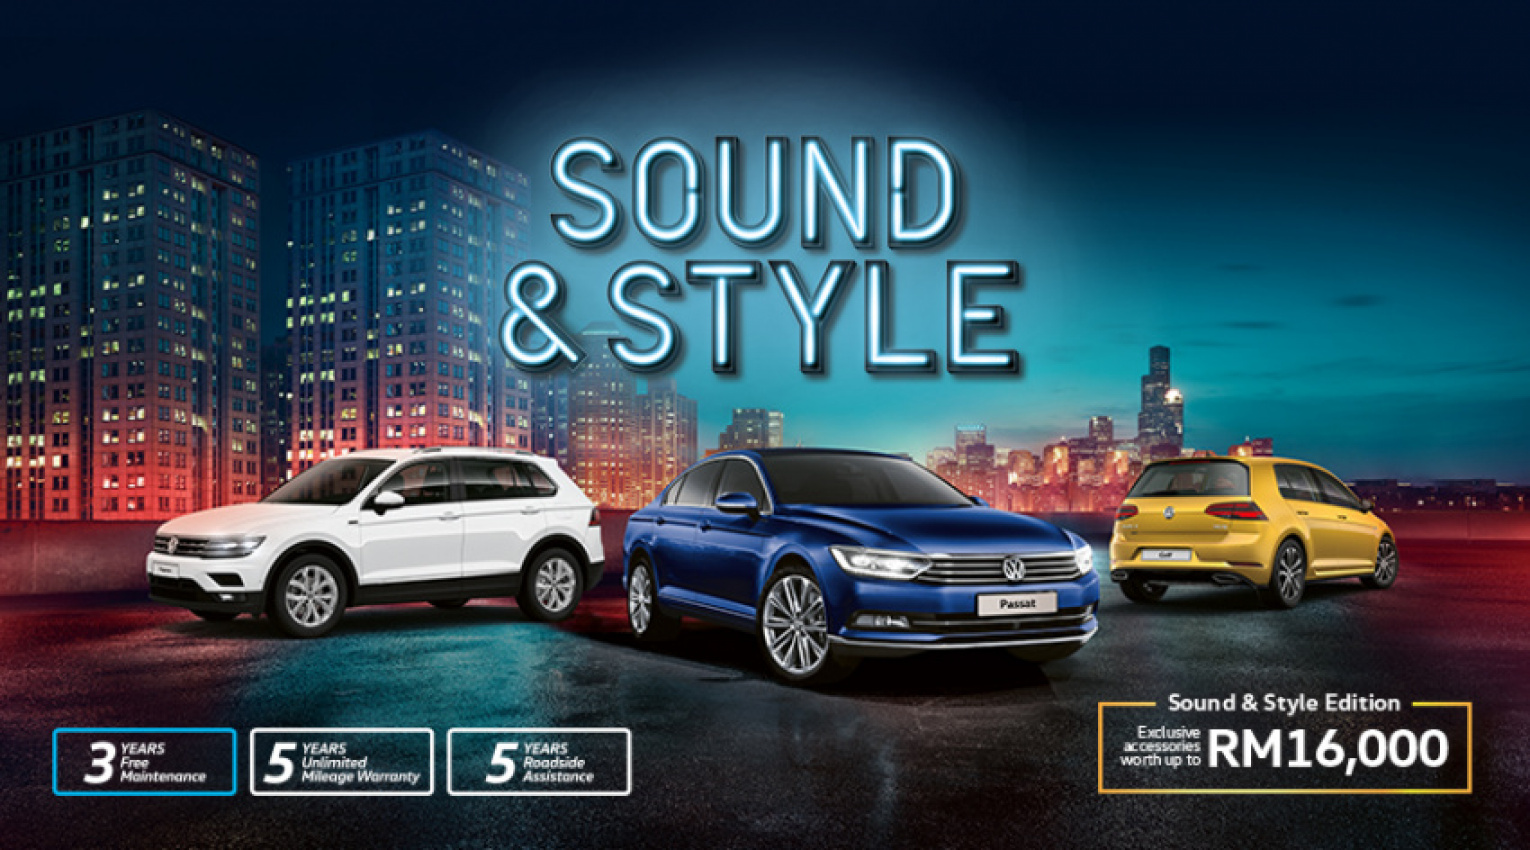 autos, car brands, cars, volkswagen, automotive, hatchback, malaysia, promotion, roadshow, sedan, volkswagen passenger cars malaysia, volkswagen passenger cars malaysia adds sound & style to its range